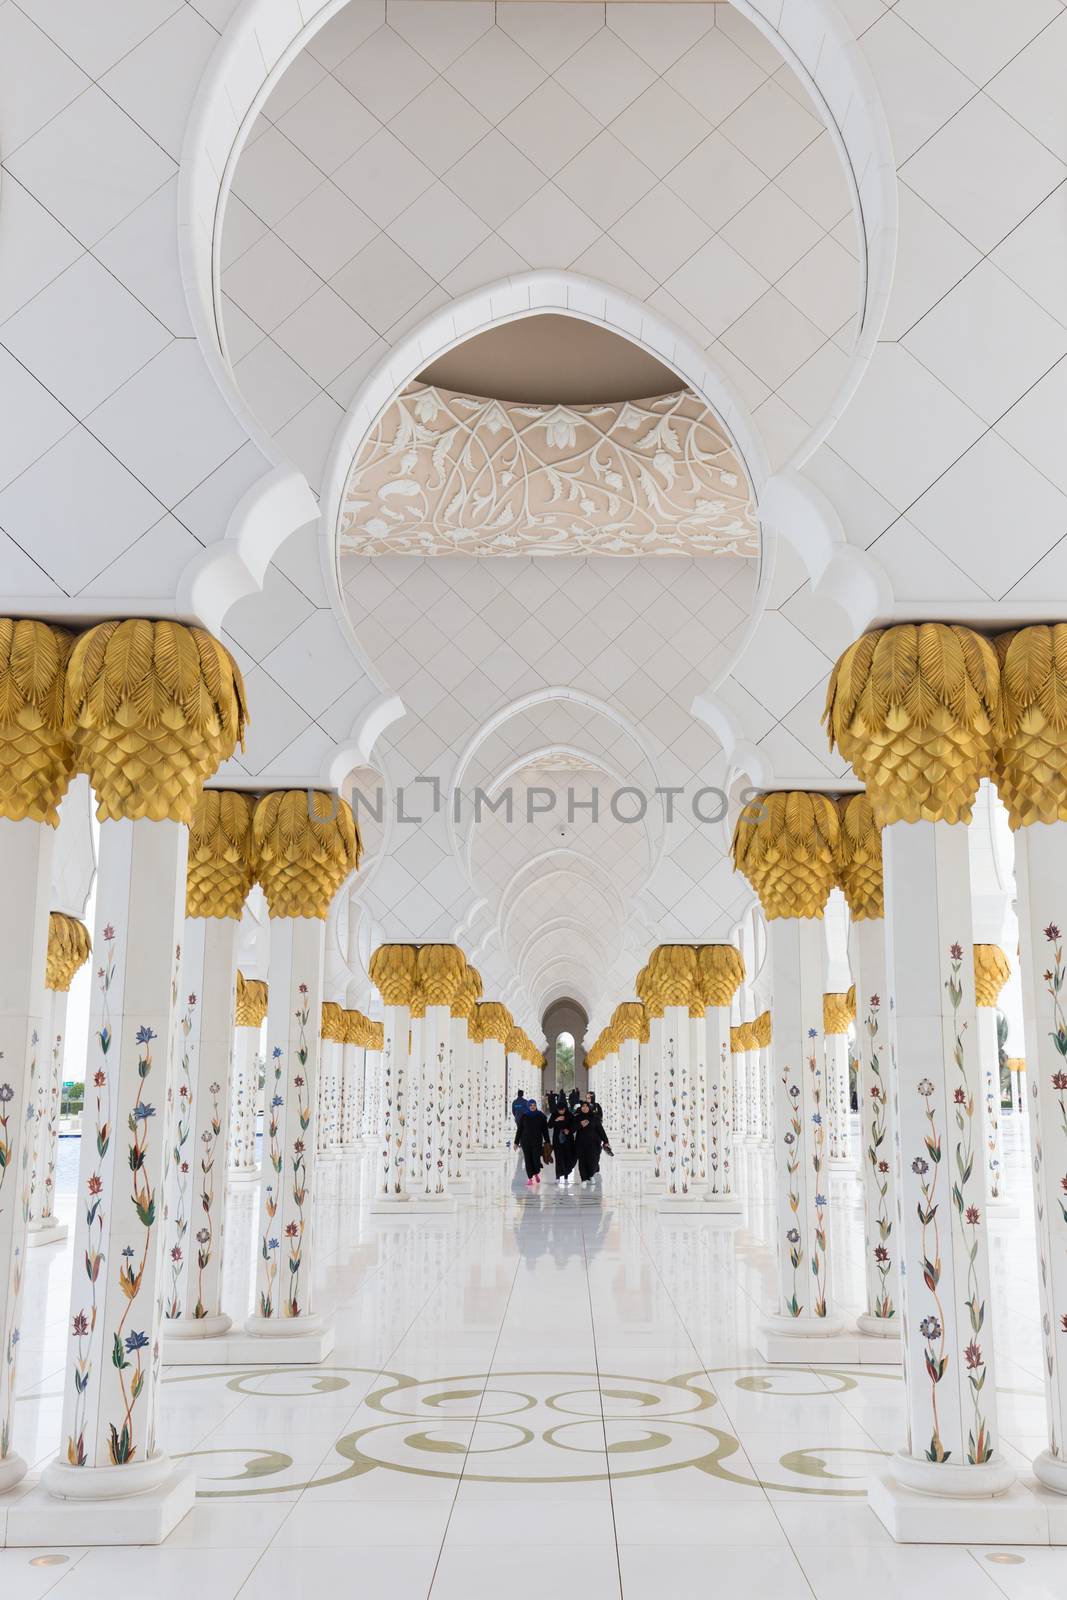 Magnificent interior of Sheikh Zayed Grand Mosque in Abu Dhabi, UAE. by kasto